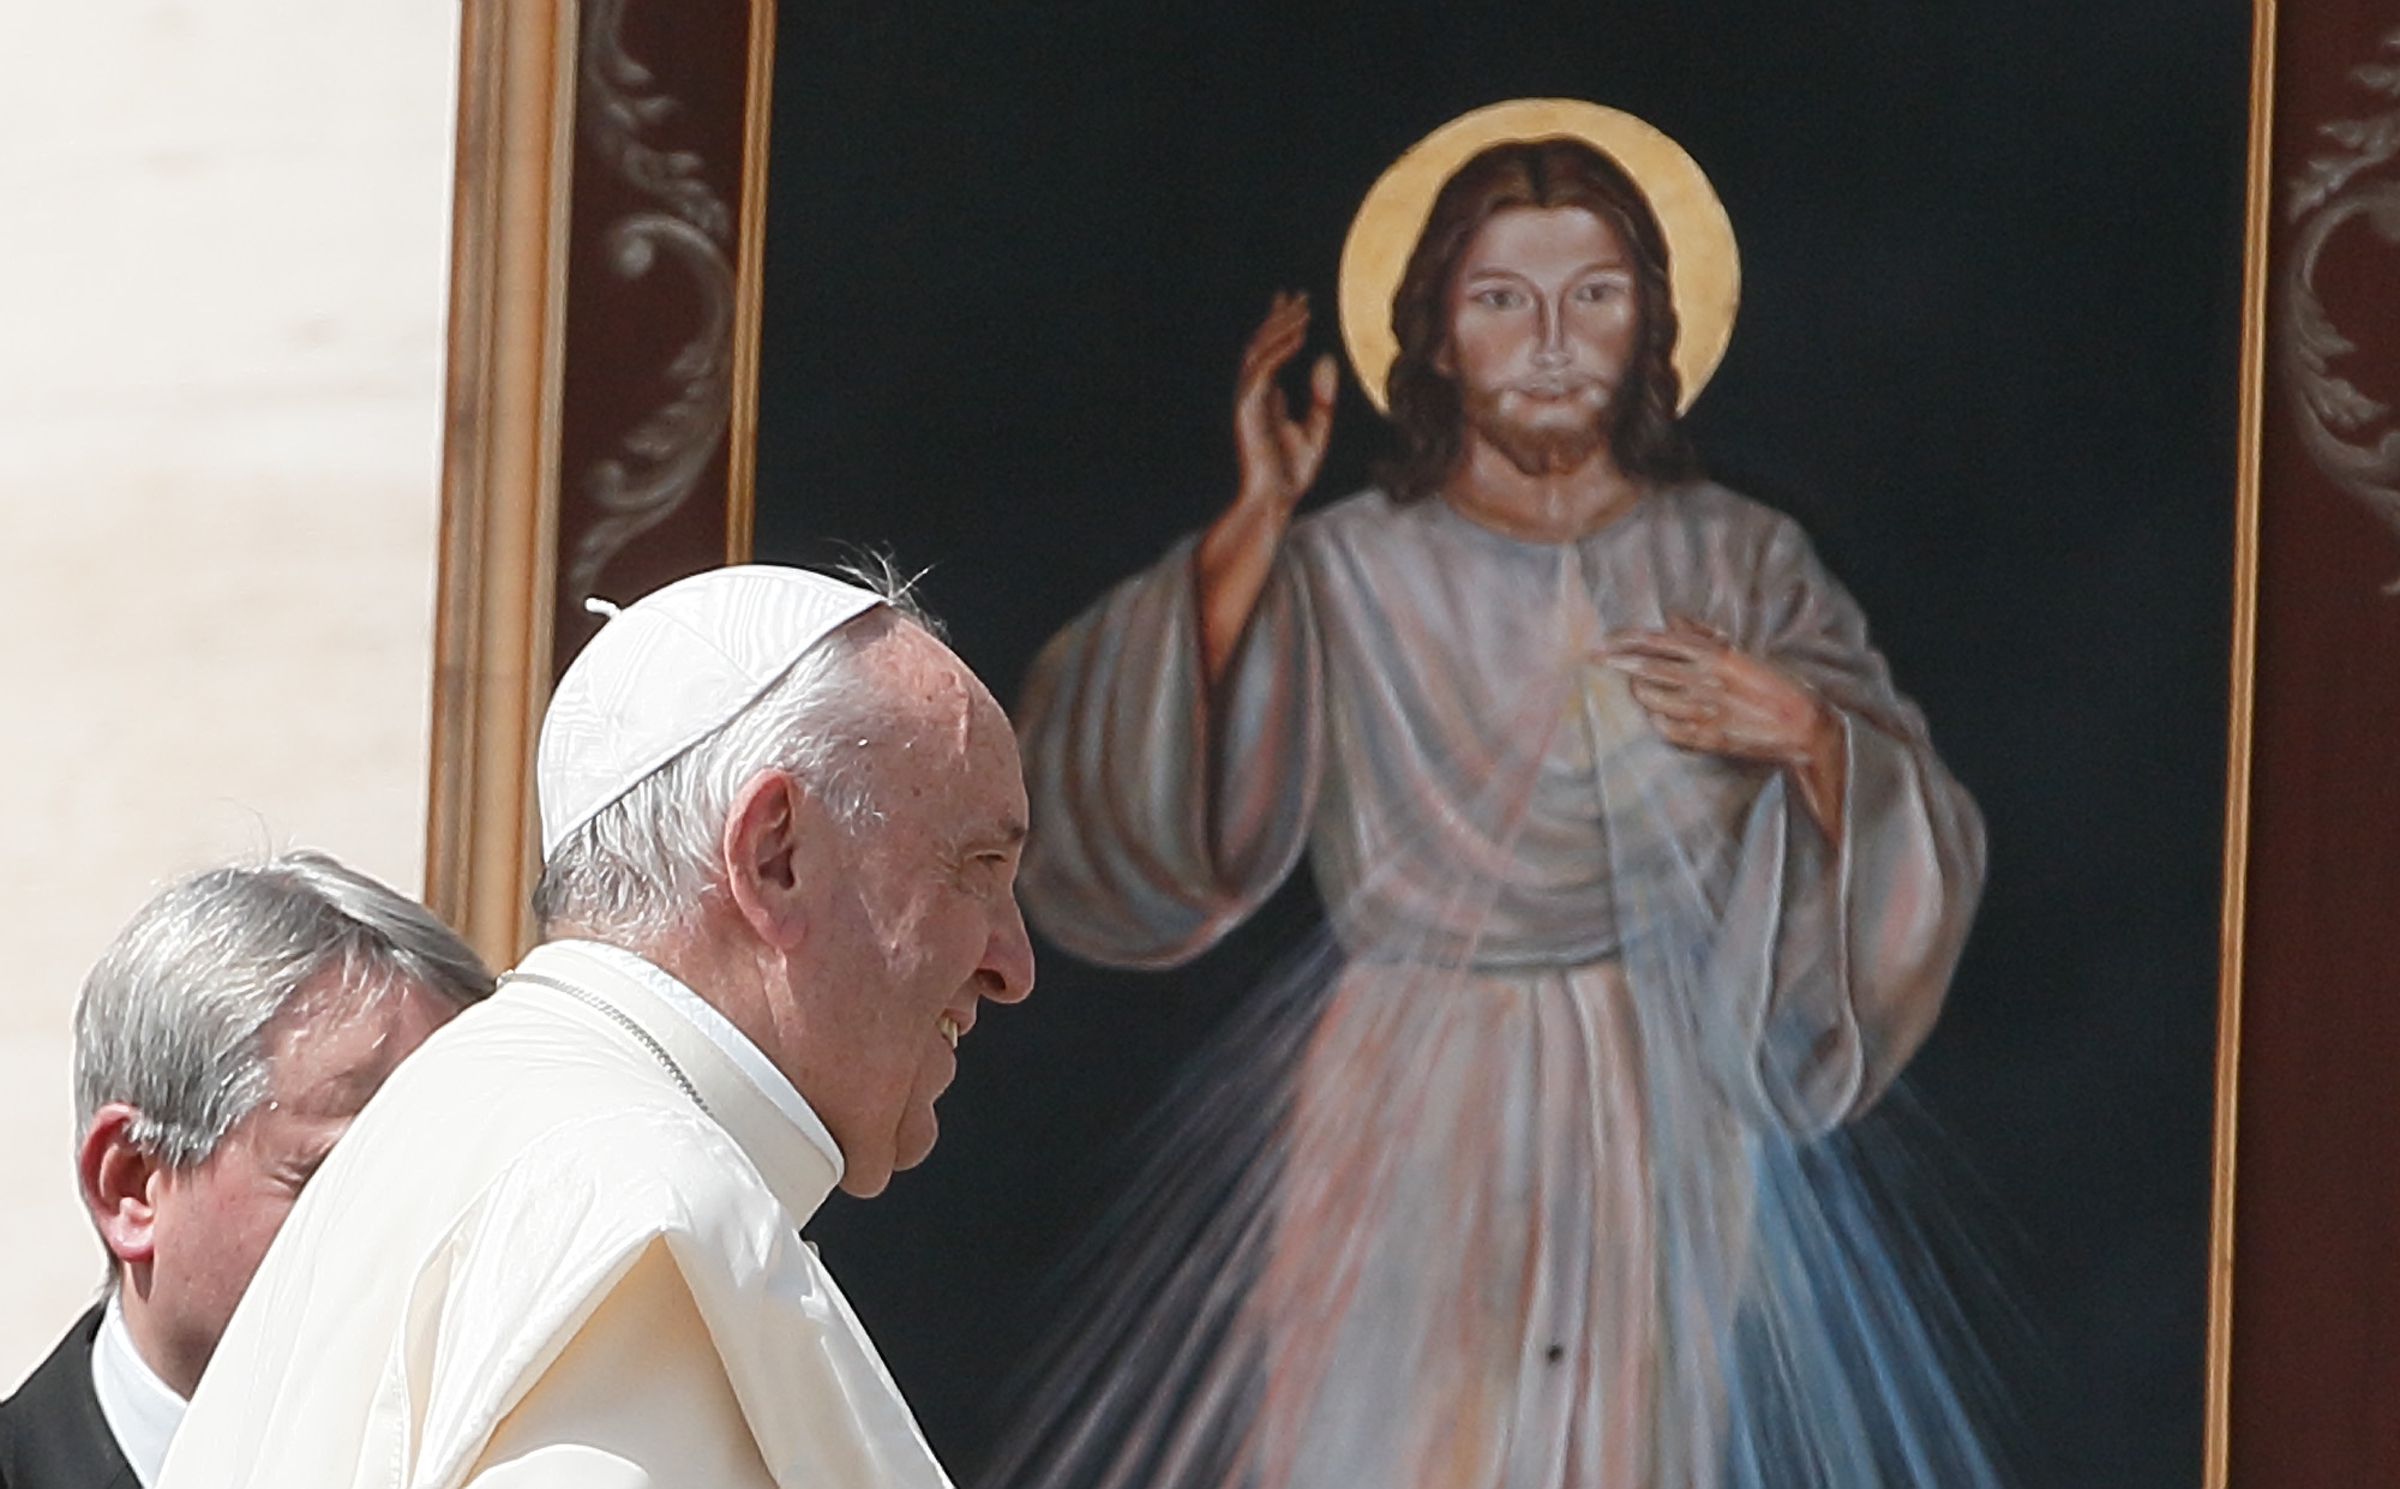 Pope Francis walks near an image of Jesus of Divine Mercy after celebrating a Mass marking the feast of Divine Mercy in St. Peter's Square at the Vatican April 8, 2018. Masses for Divine Mercy Sunday, celebrated on the Sunday after Easter, are expected to be livestreamed in Catholic churches throughout the United States amid the coronavirus pandemic. (CNS photo/Paul Haring) See DIVINE-MERCY-MASS-BASILICA April 16, 2020.